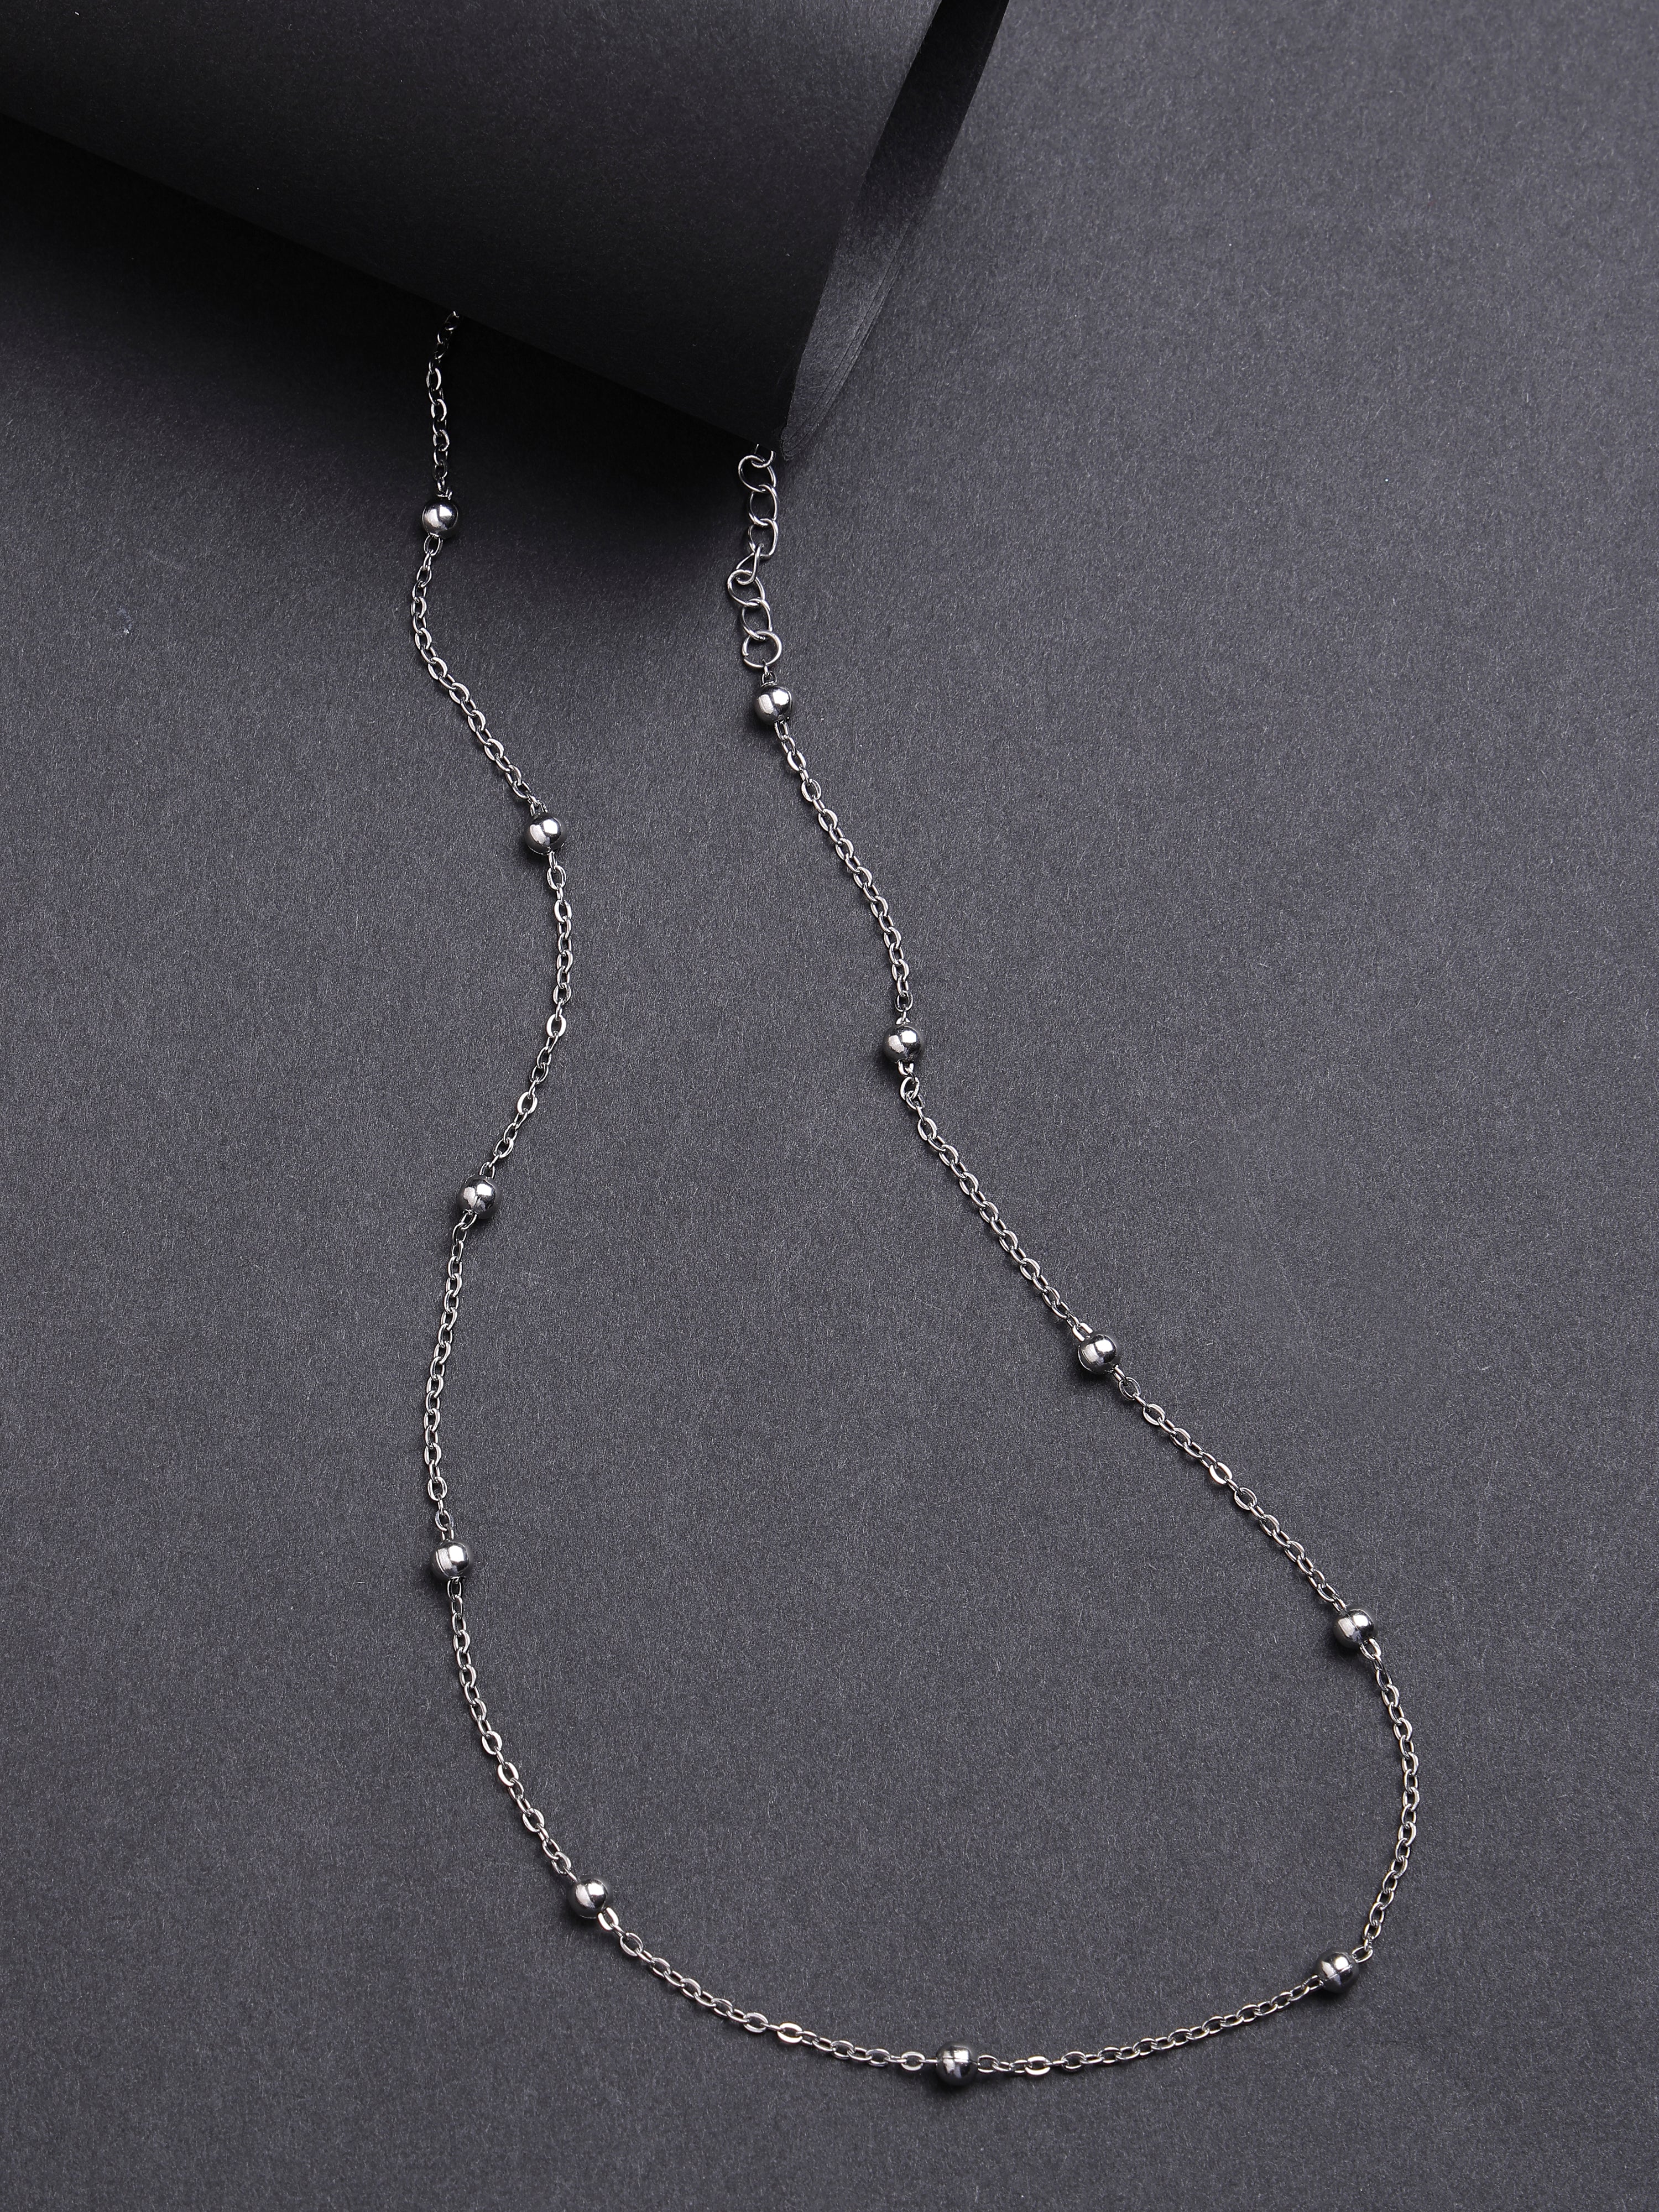 Women's Silver-Toned Artificial Beads German Silver Oxidised Chain - Nvr